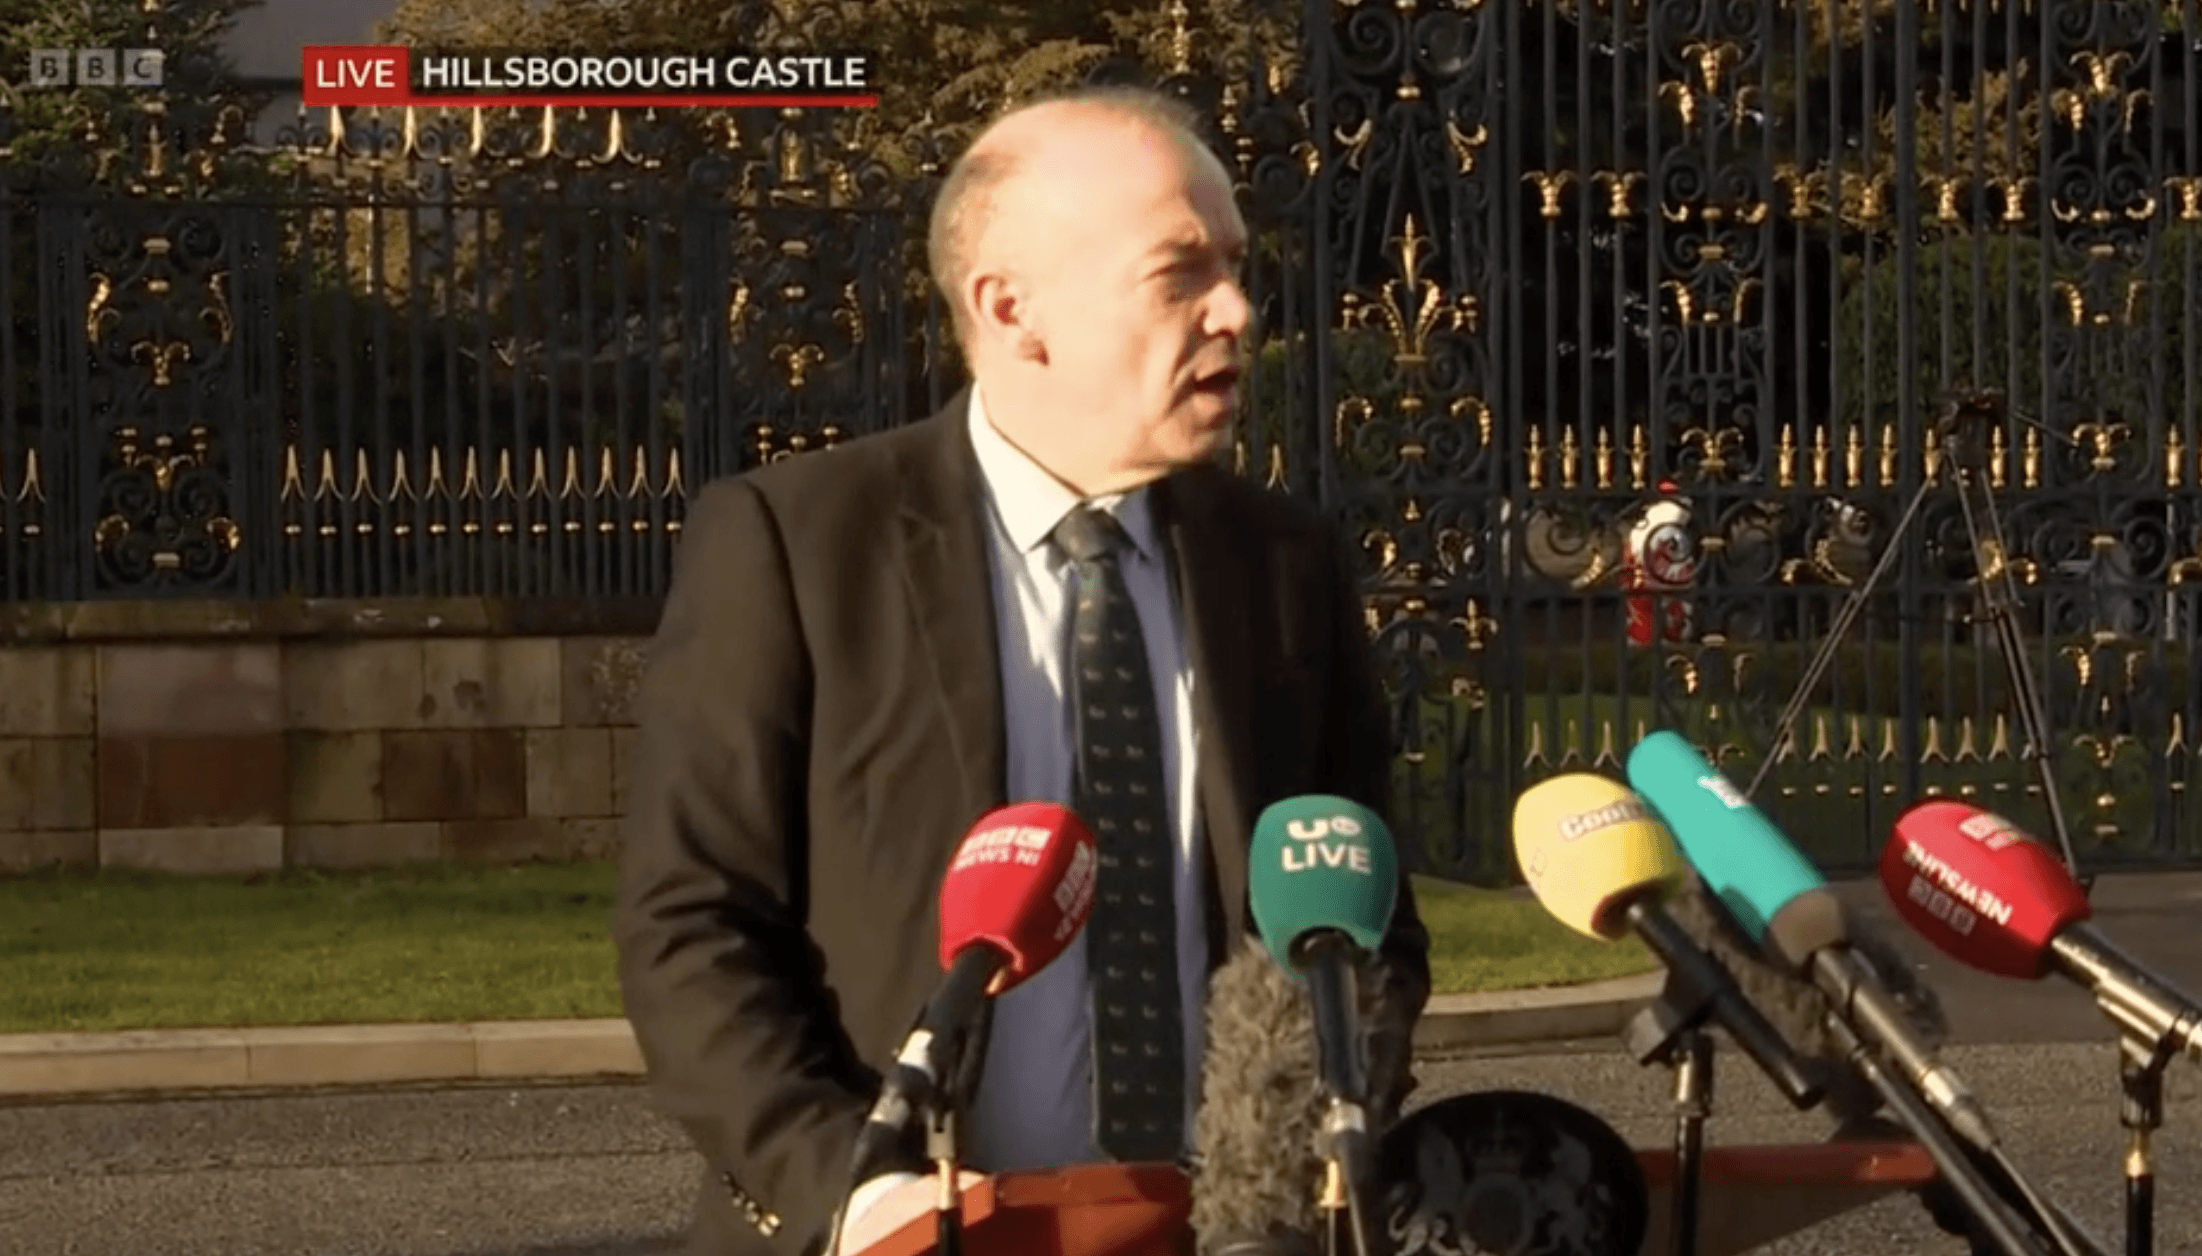 UNENDING TALKS: Secretary of State Chris Heaton-Harris outside Hillsborough Castle after the latest discussions on Tuesday